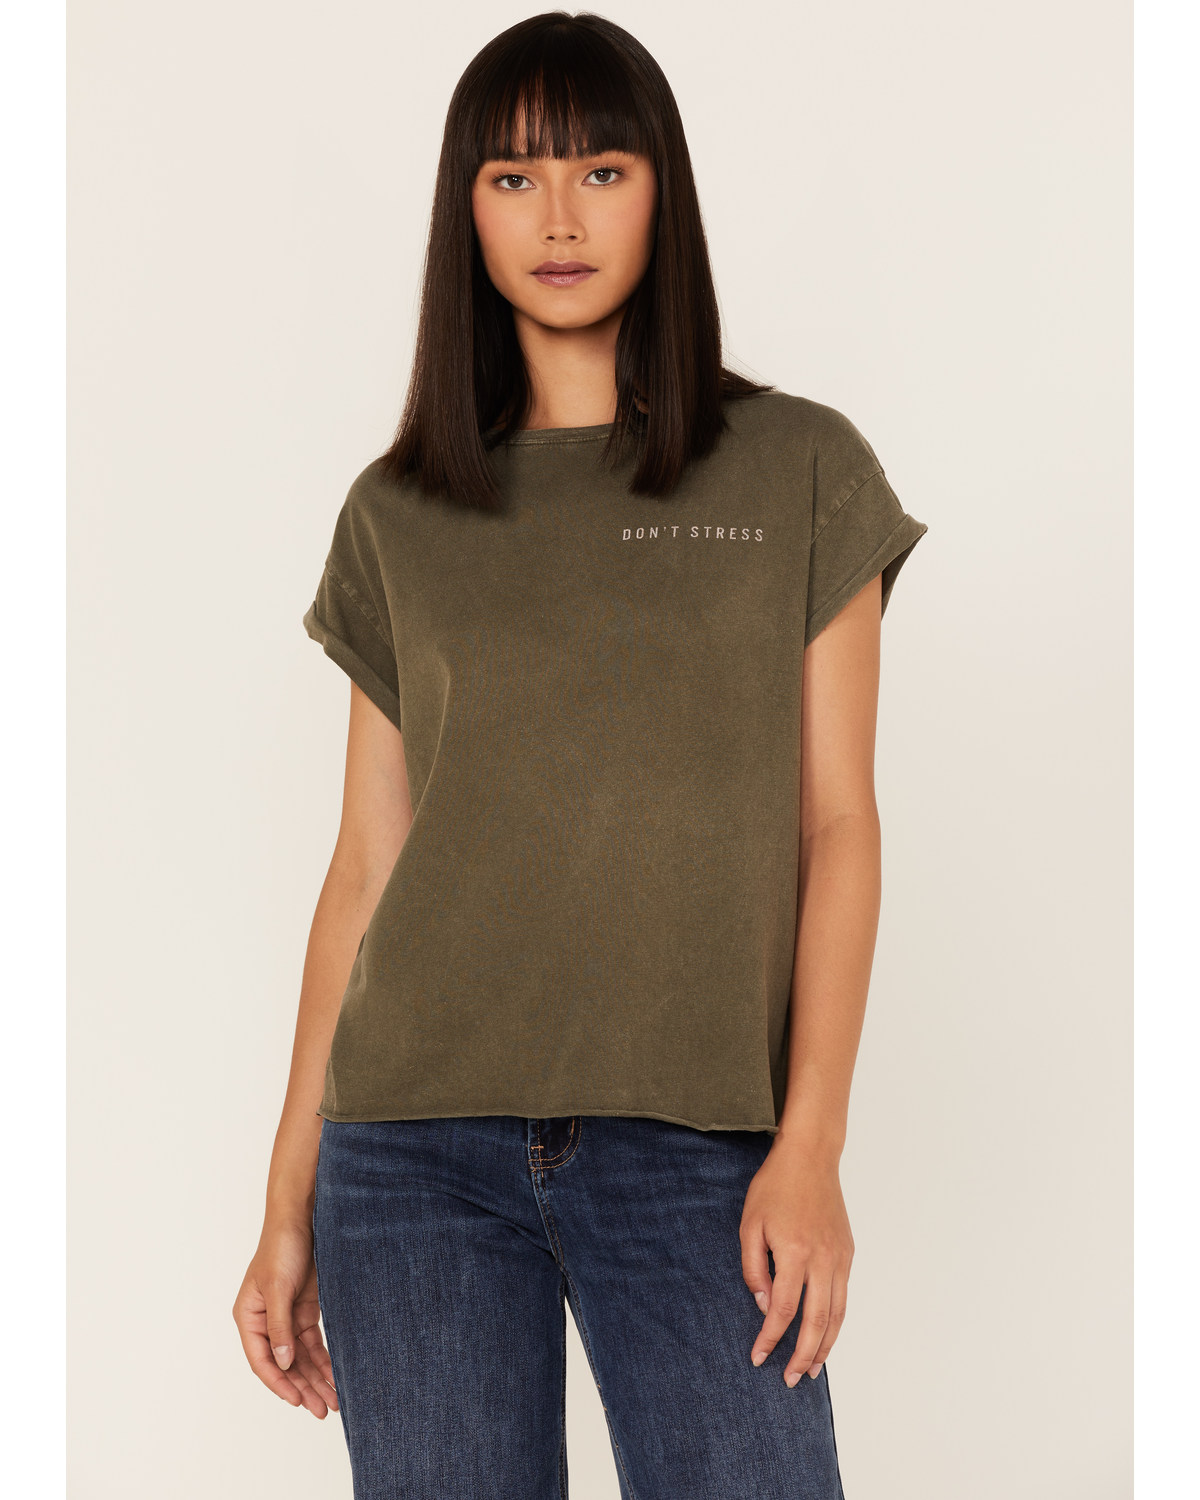 Cleo + Wolf Women's Don't Stress Graphic Tee